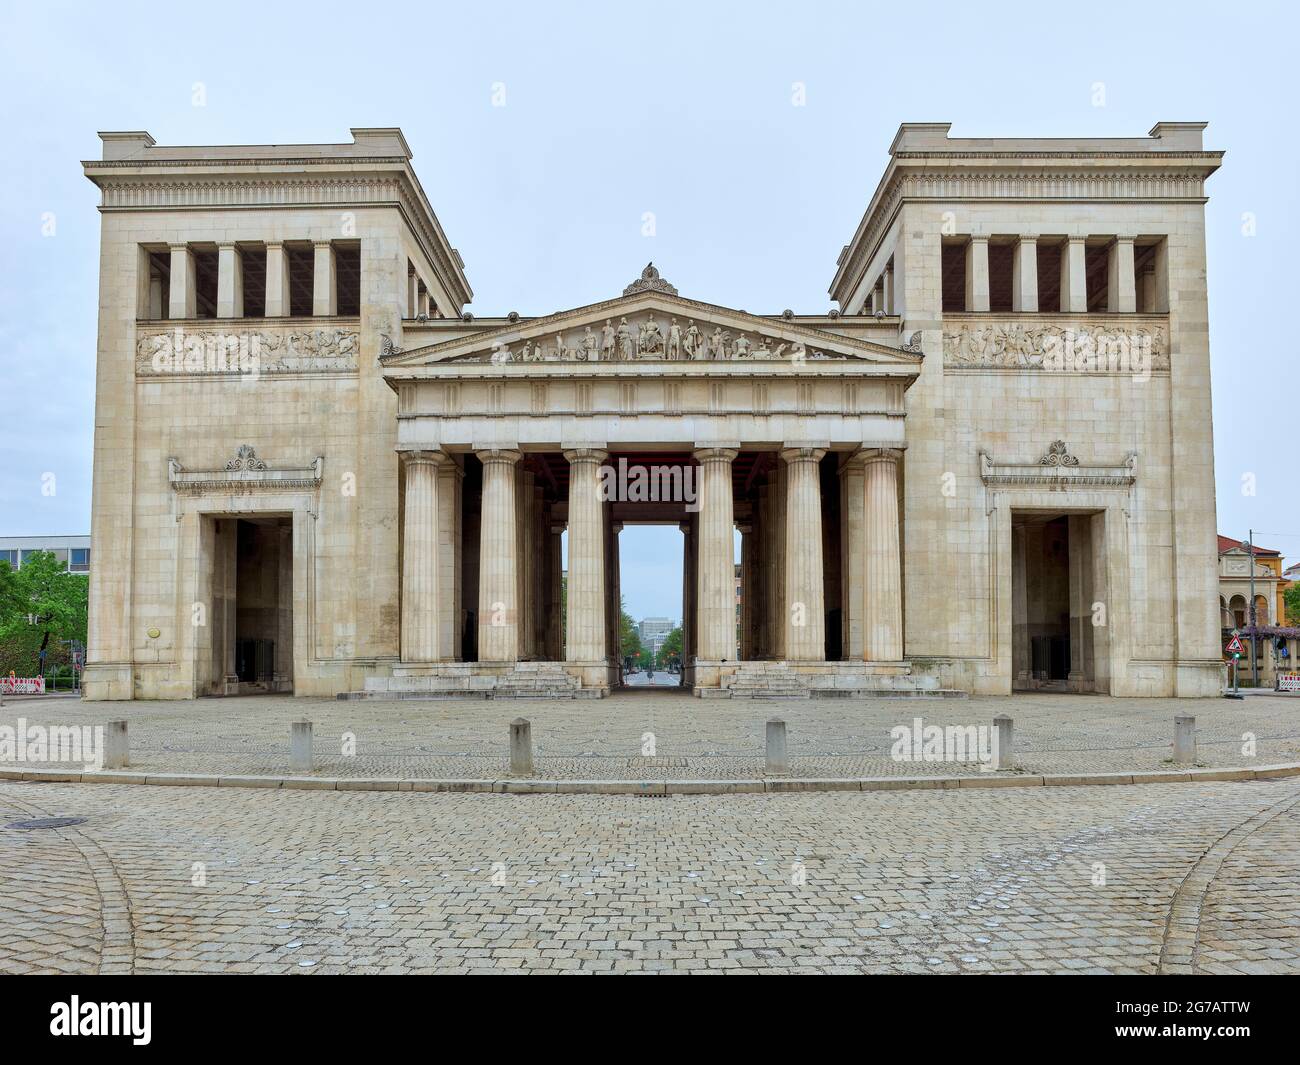 State capital, university town, residence town, place of interest, historical place of interest, monument, listed, monument protection, Doric Propylaea, Propylaea, Ludovician Isar Athens, Ludovician, Karl von Fischer, Leo von Klenze, Ludwig von Schwanthaler, European classicism, classicism, former prince path, prince path , Königsbau Stock Photo